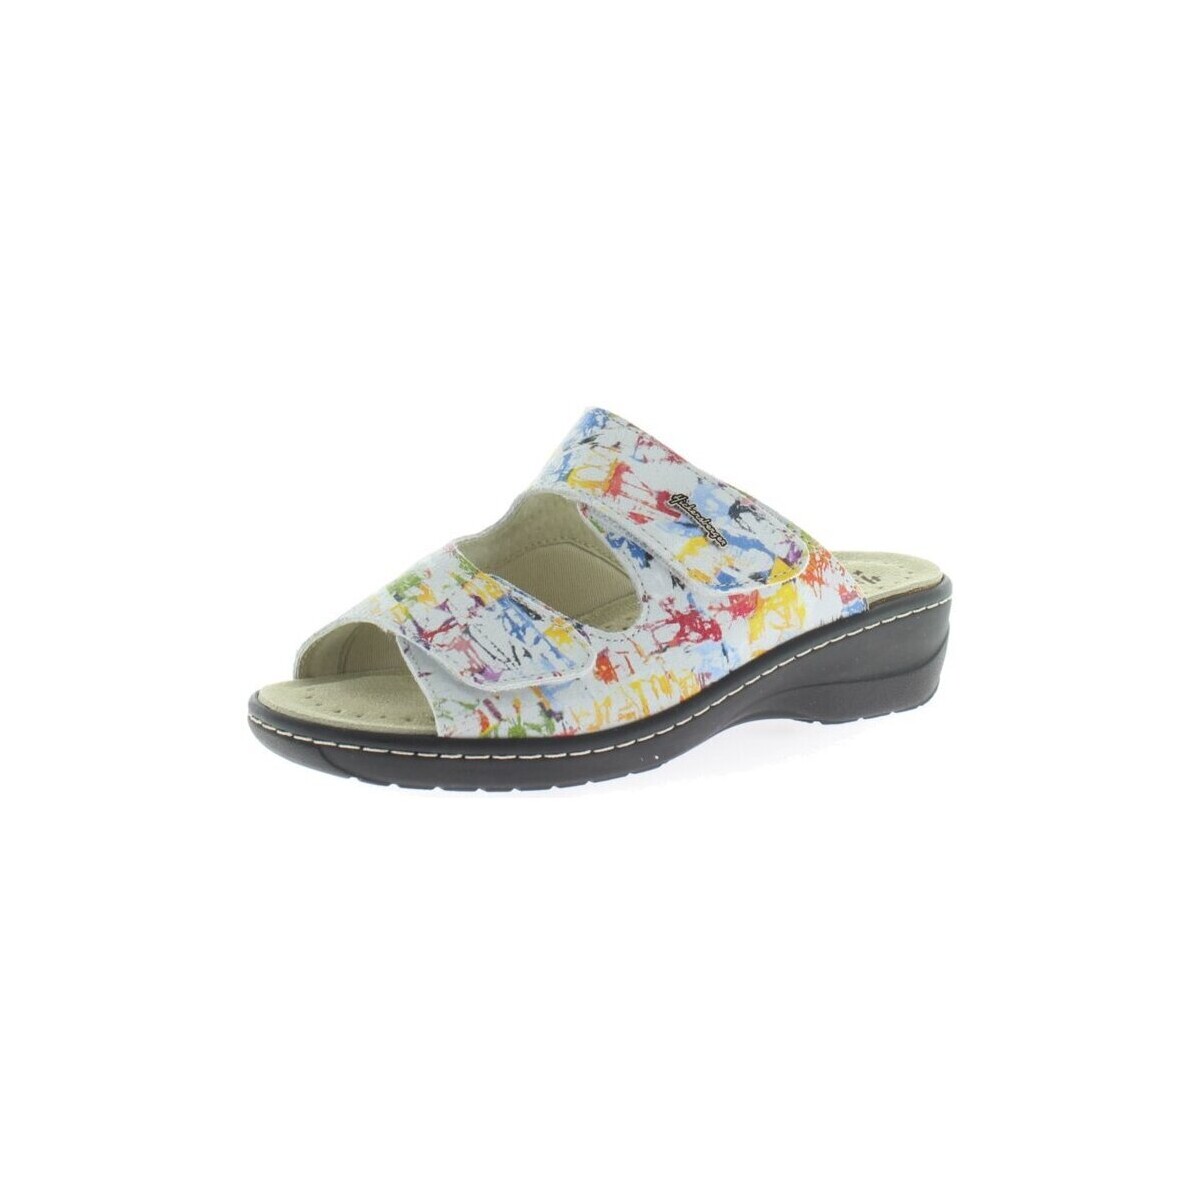 Chaussures Femme Sabots Hickersberger  Multicolore